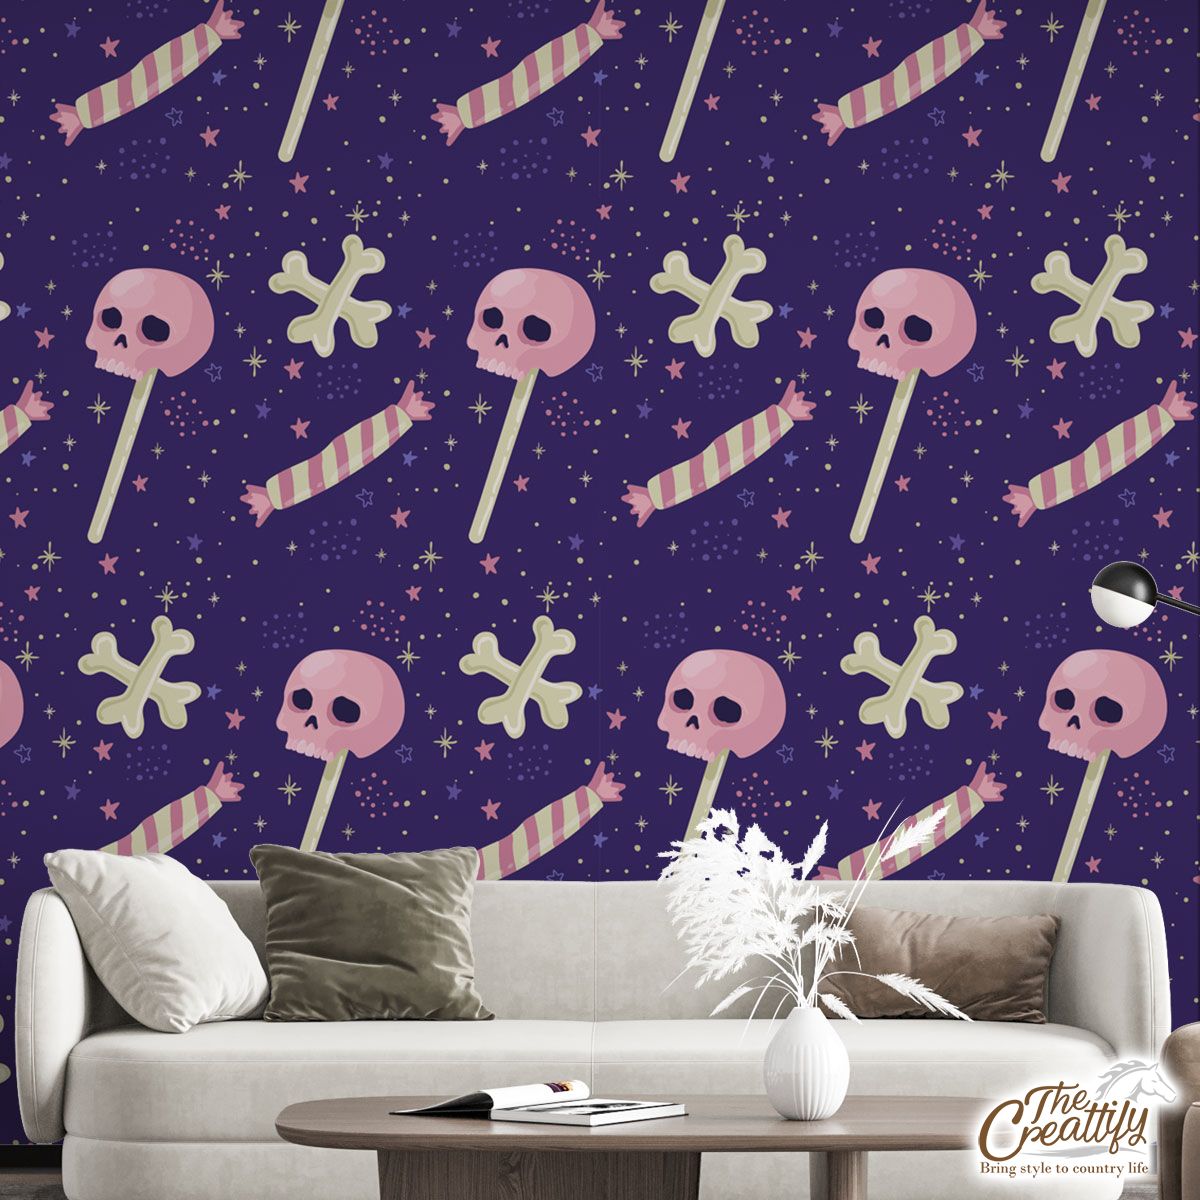 Happy Halloween With Skull, Candy And Bone Wall Mural